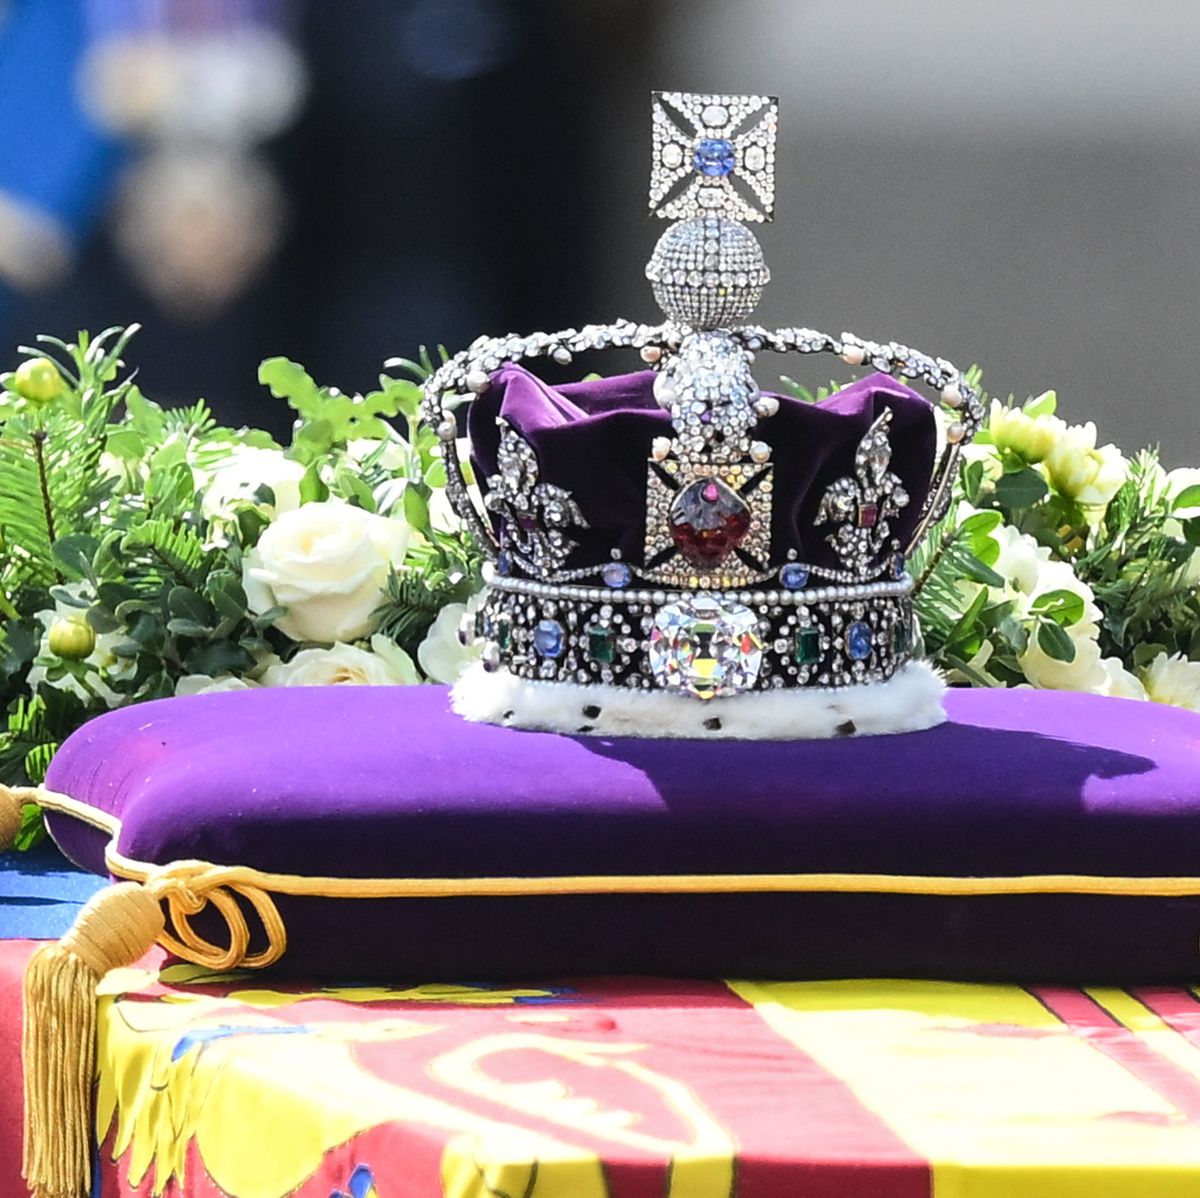 https://hips.hearstapps.com/hmg-prod/images/the-gun-carriage-bearing-the-coffin-of-the-late-queen-news-photo-1663163129.jpg?crop=0.668xw:1.00xh;0.223xw,0&amp;resize=1200:*